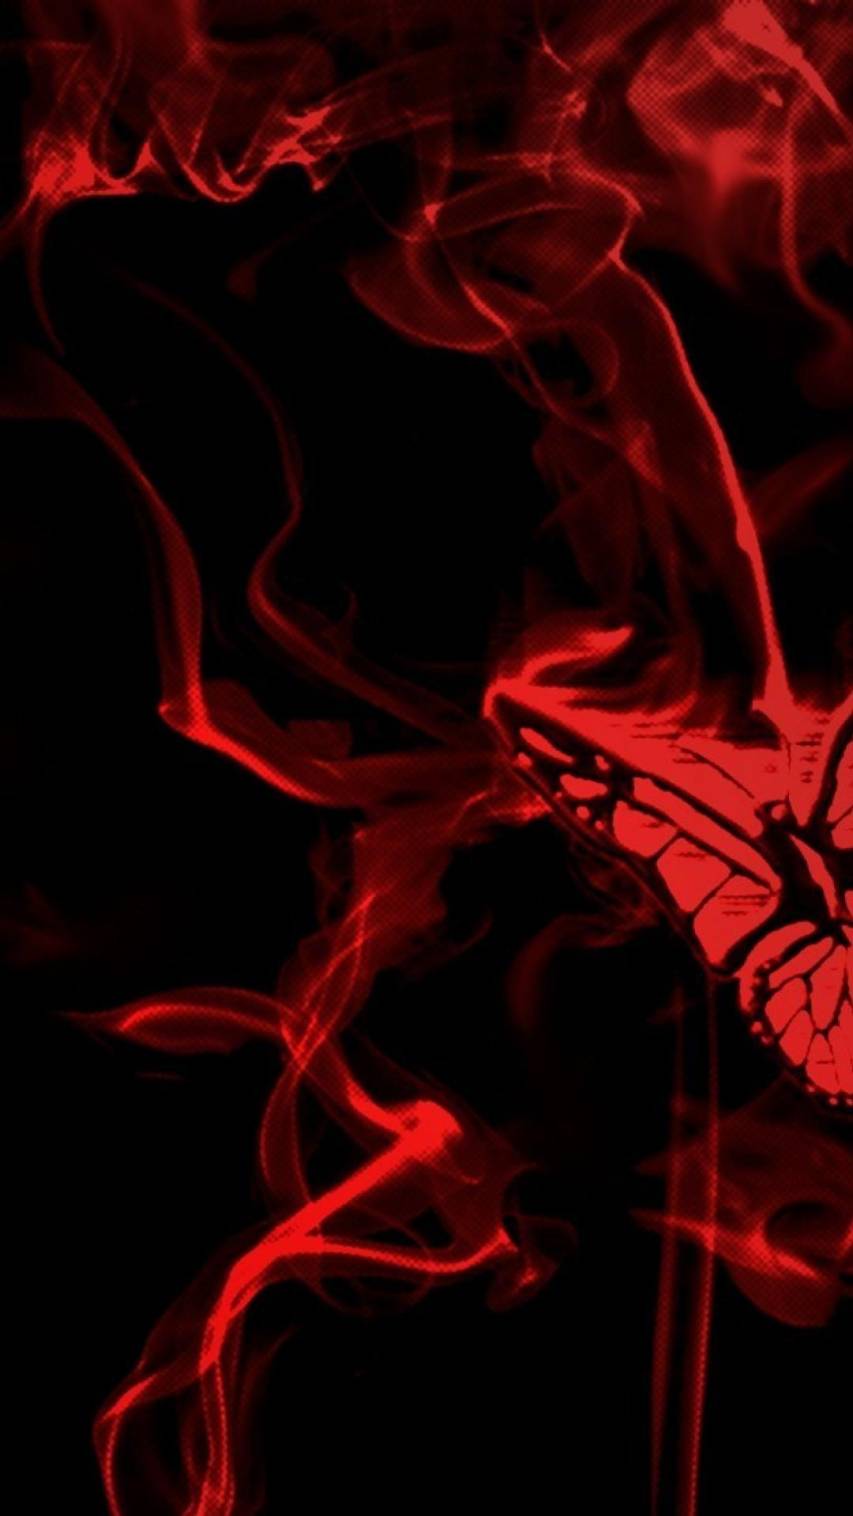 Cool Red and Black Picture Backgrounds free for iPhone